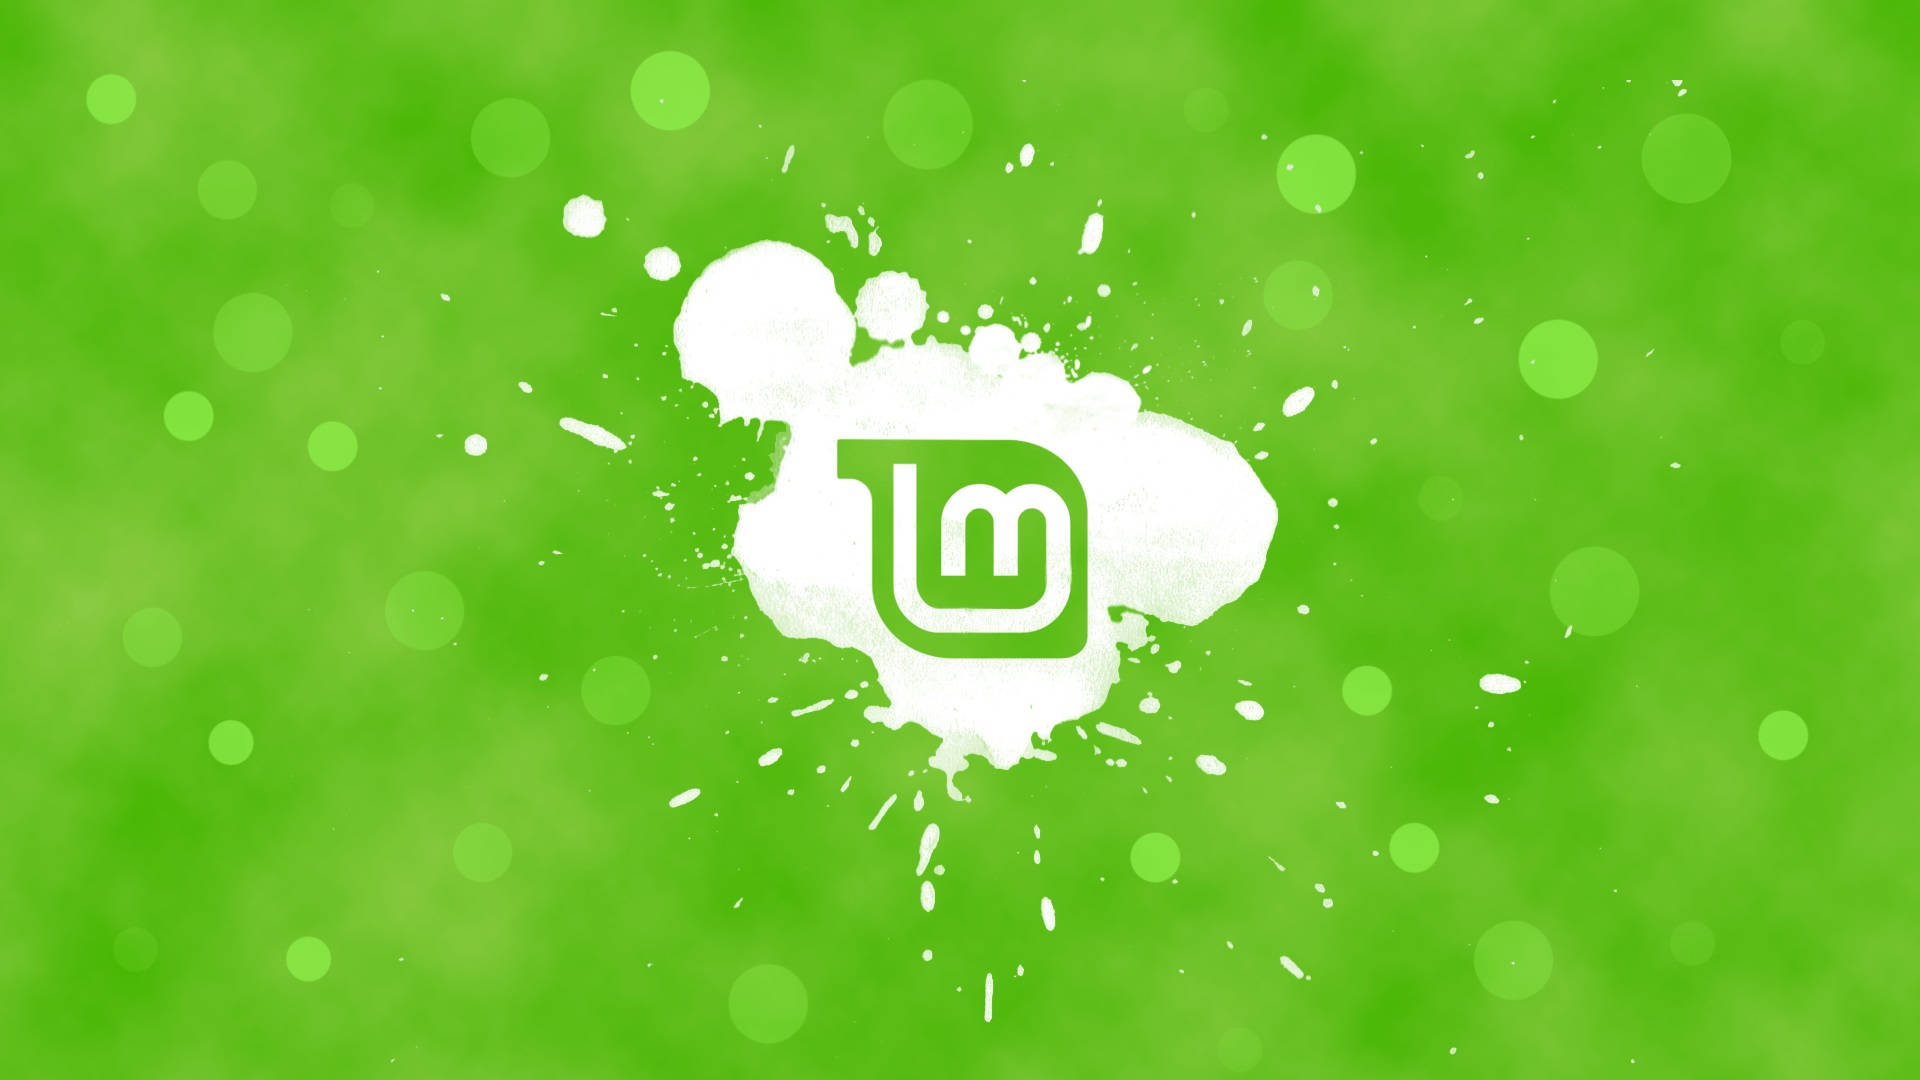 Operating System Linux Mint Green Themed Logo Background